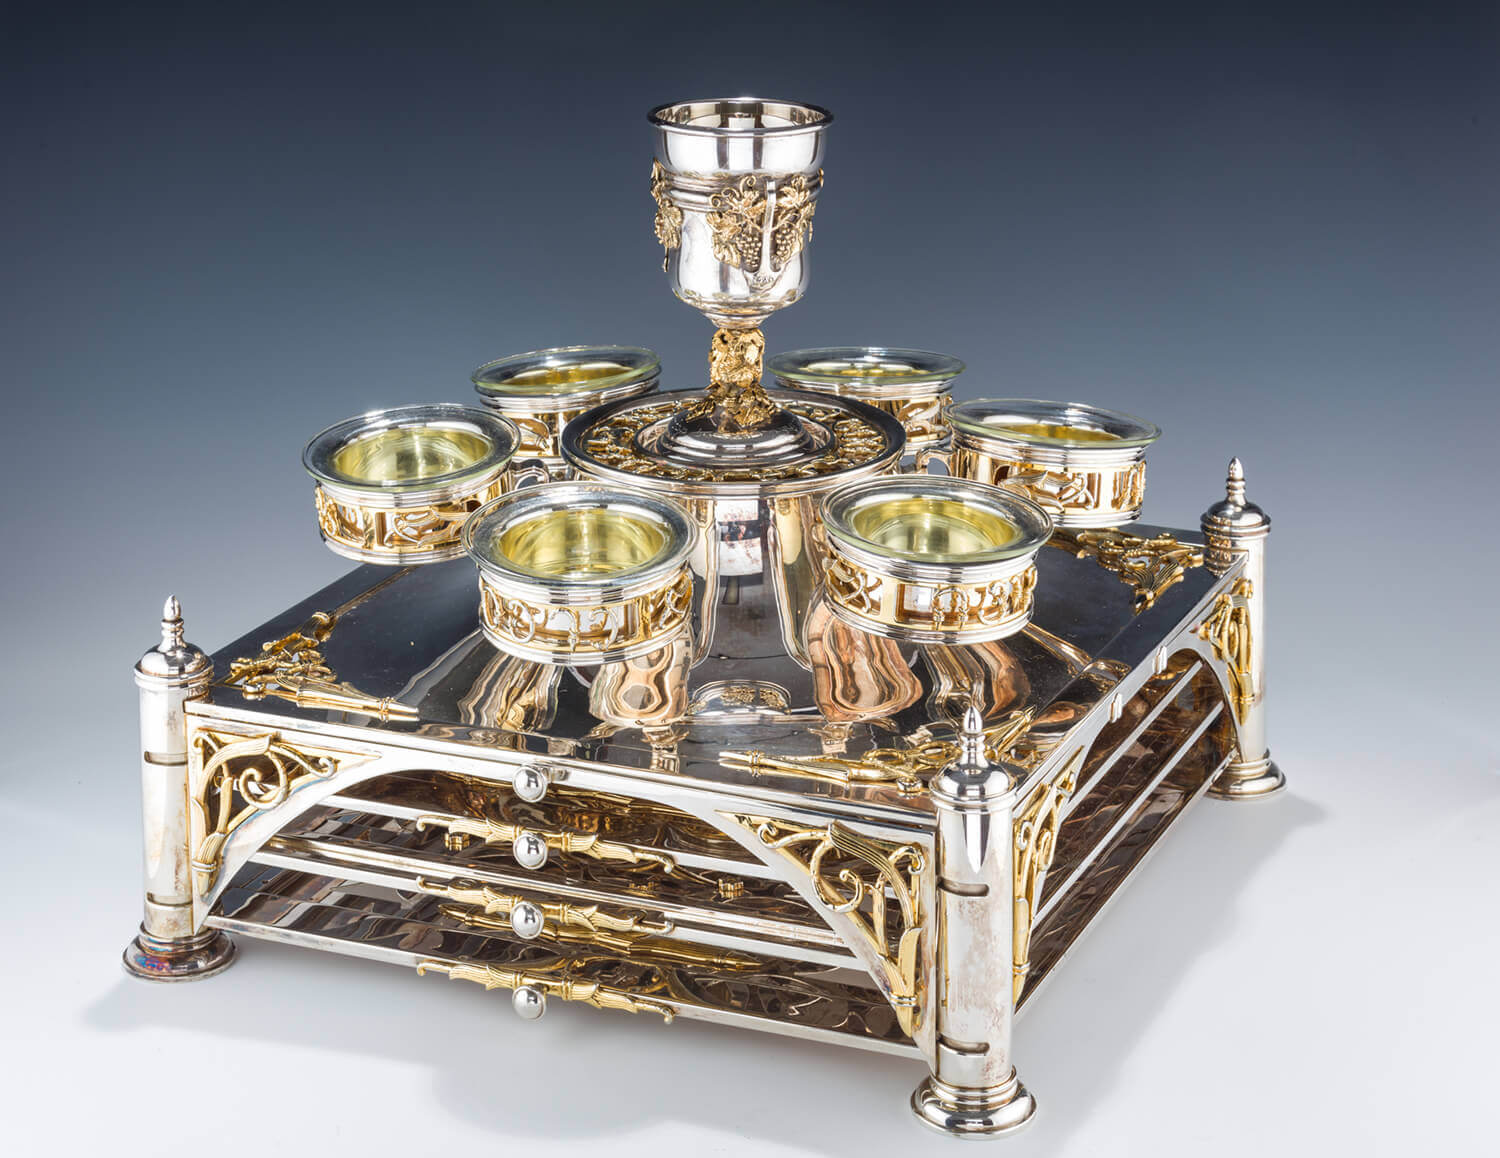 160. A SILVER PLATED SEDER EQUIPAGE BY DUDIK SWED